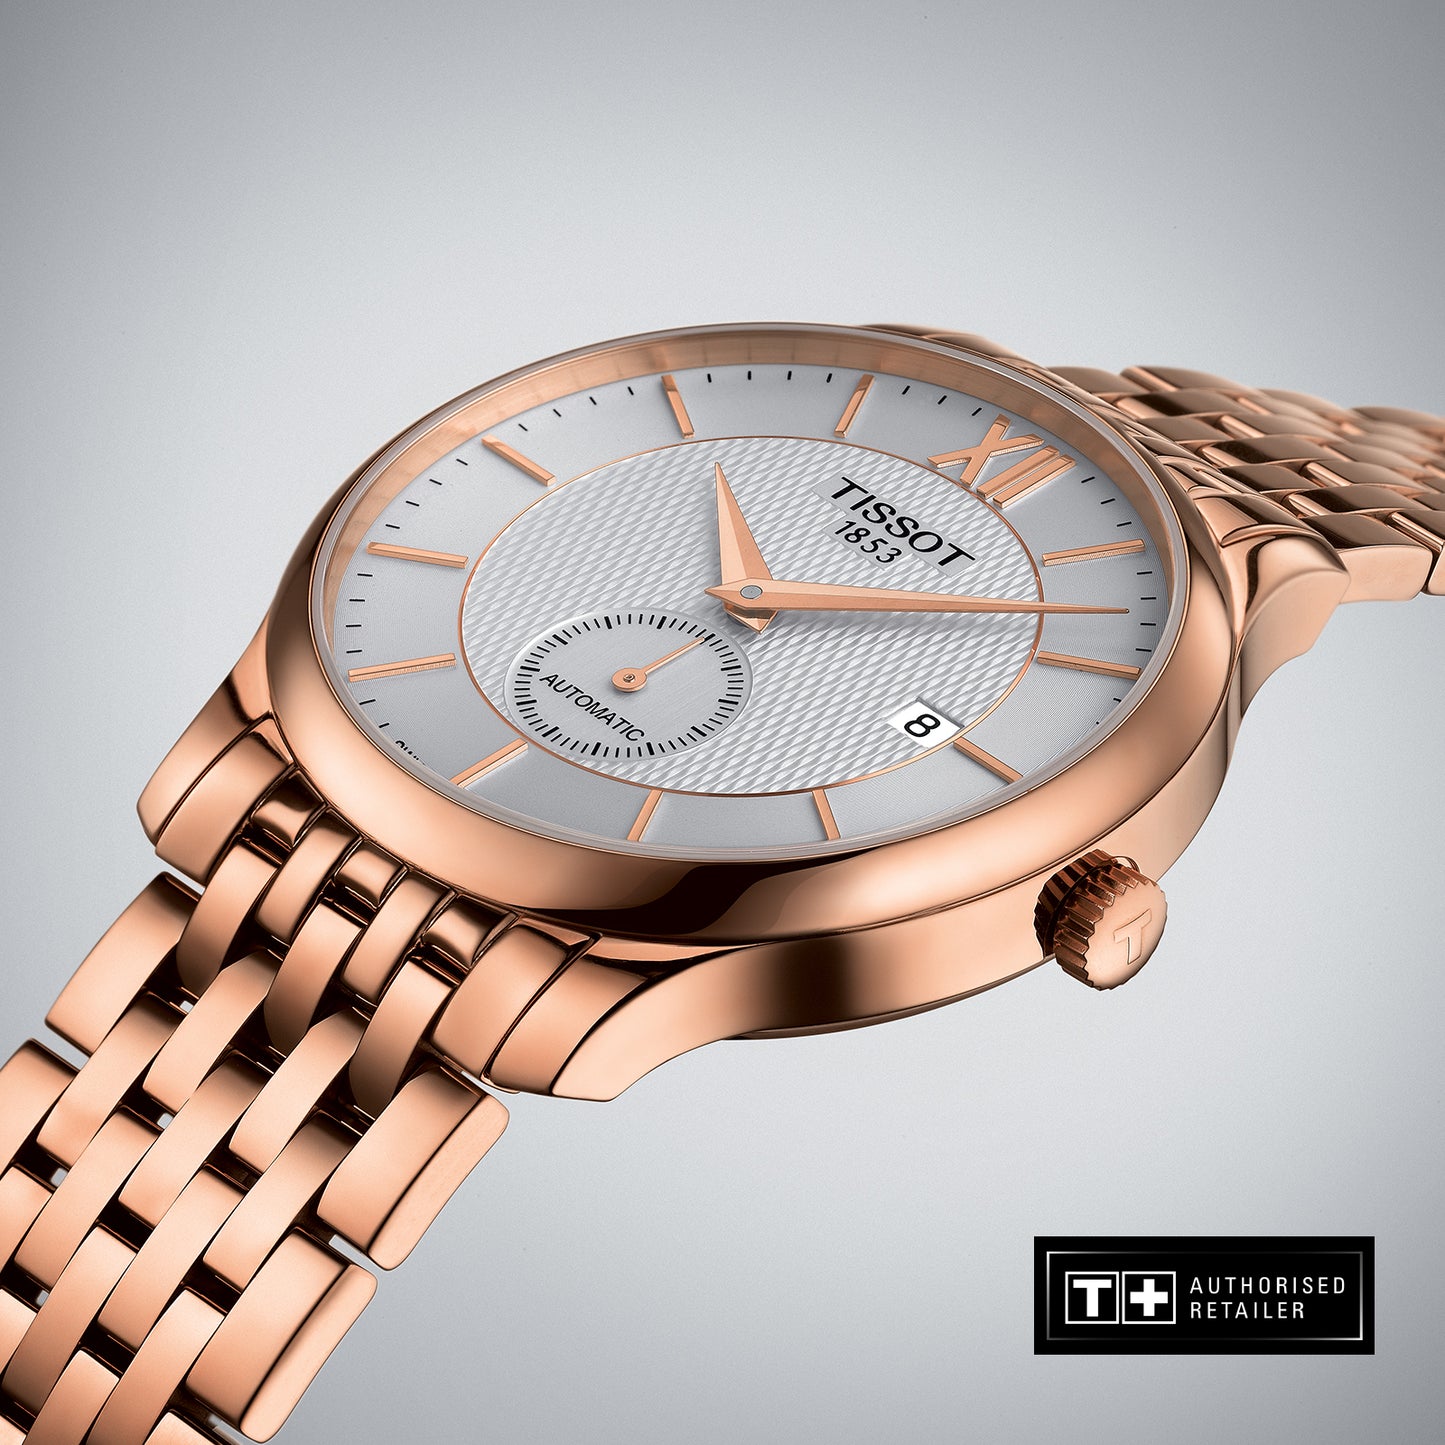 Tissot Tradition Automatic Small Second T063.428.33.038.00